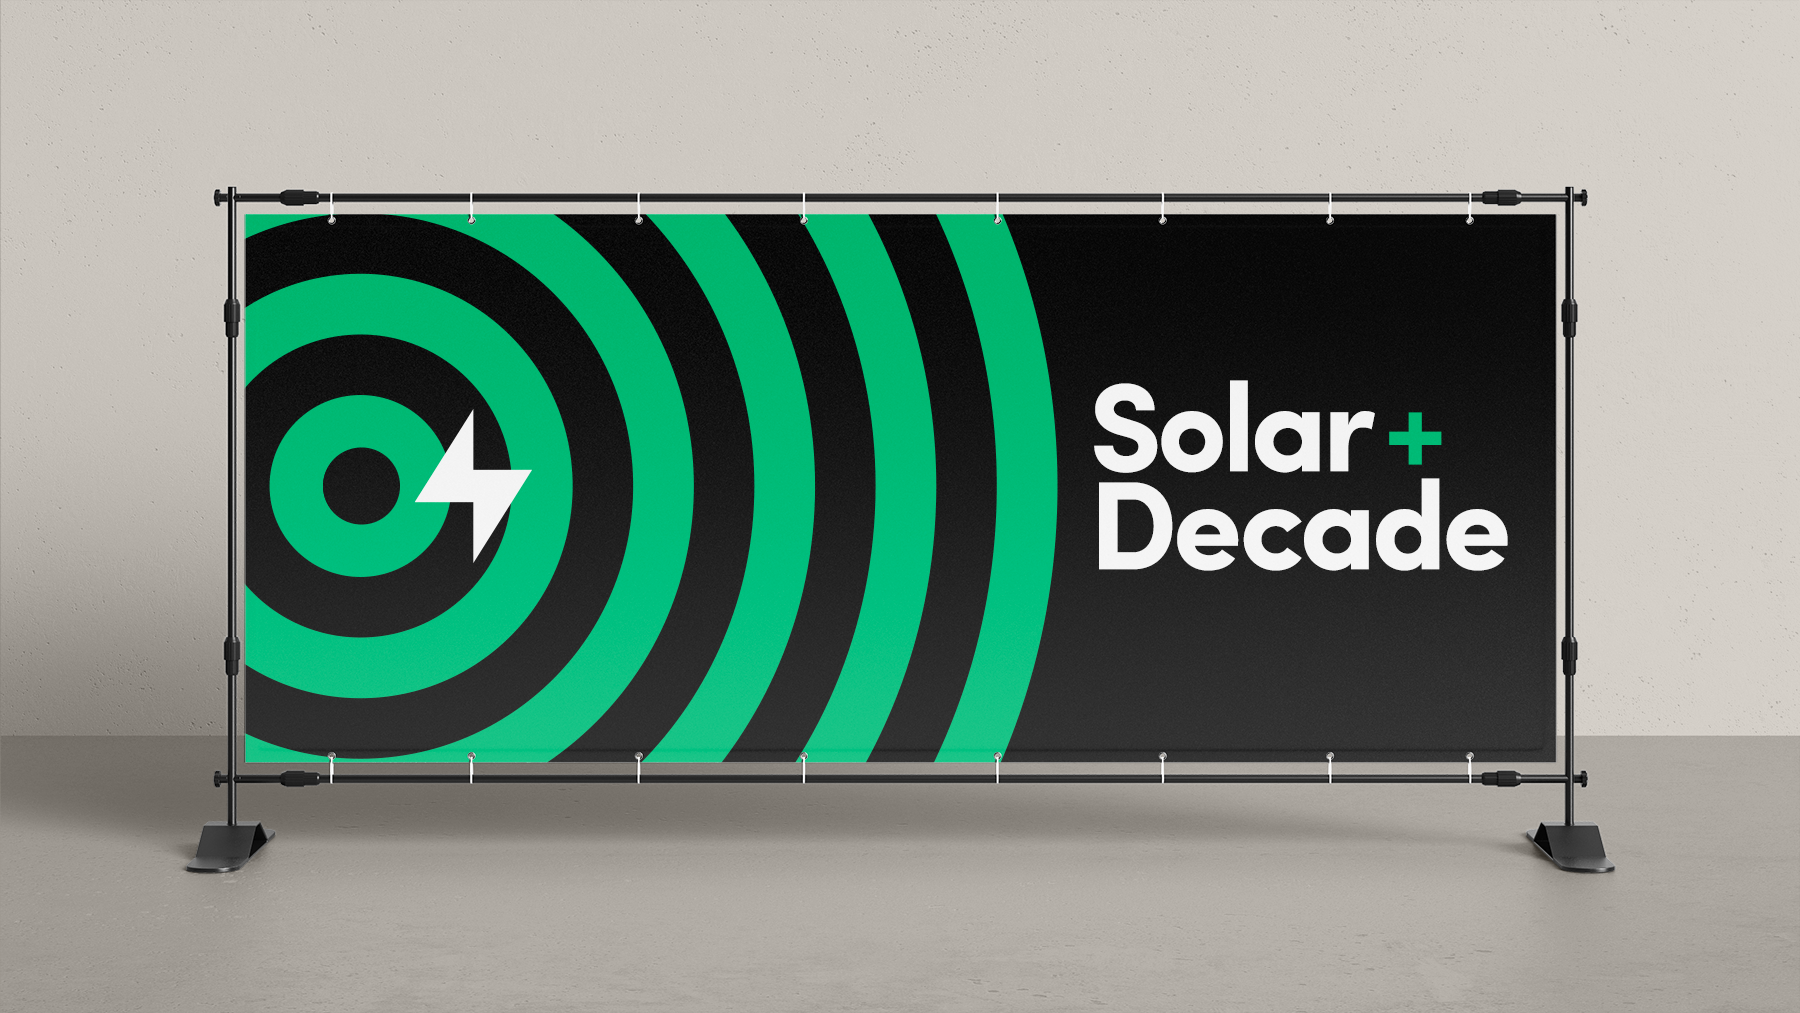 The Solar+ Decade Feature